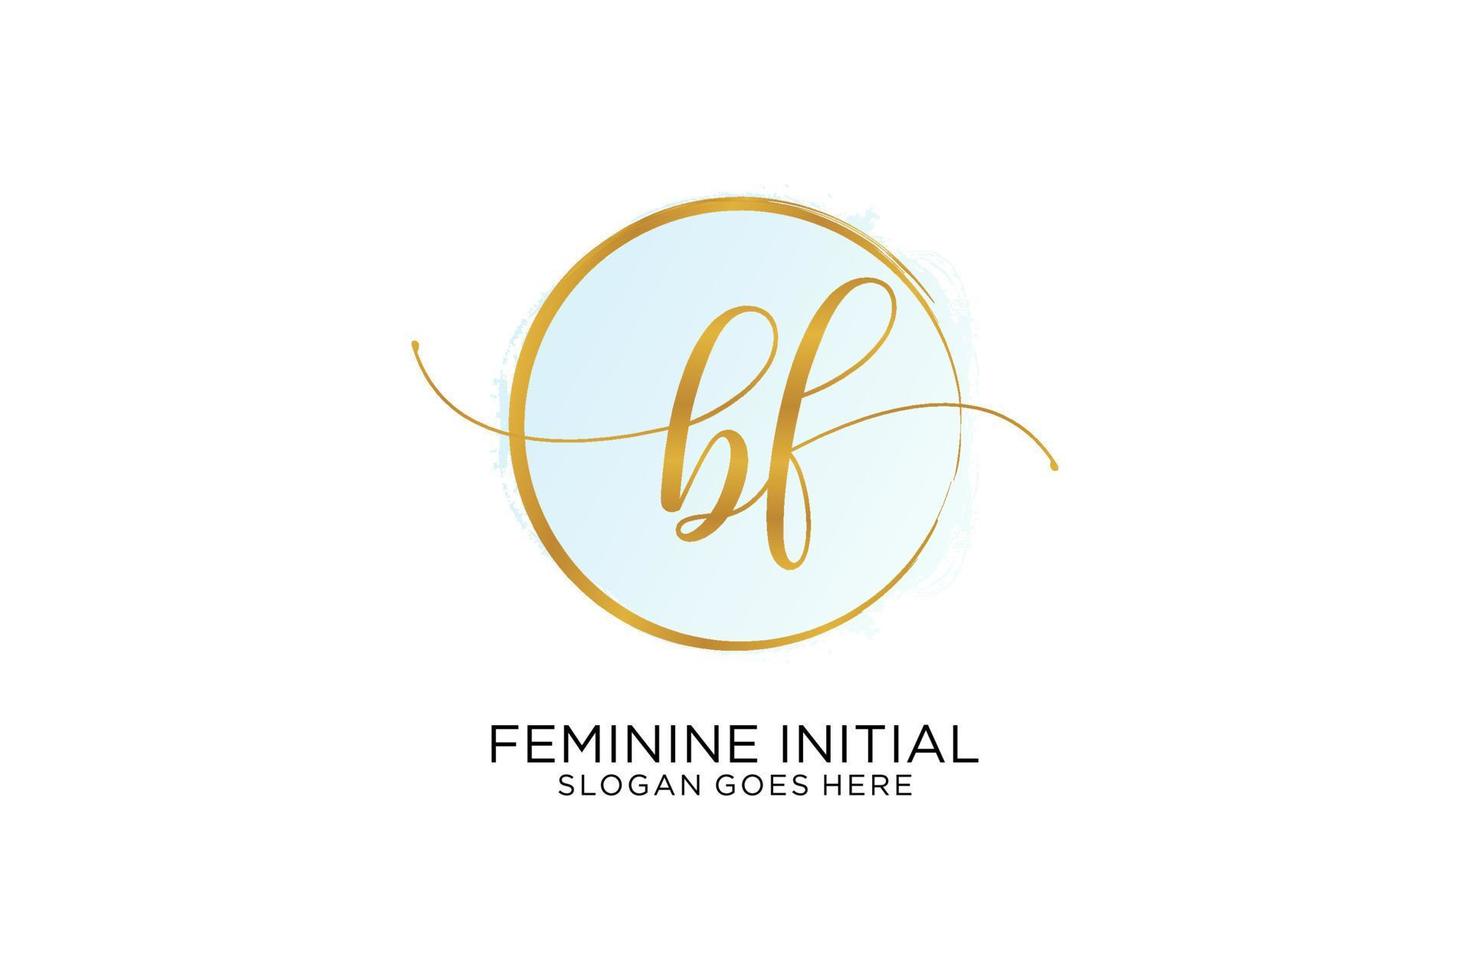 Initial BF handwriting logo with circle template vector signature, wedding, fashion, floral and botanical with creative template.